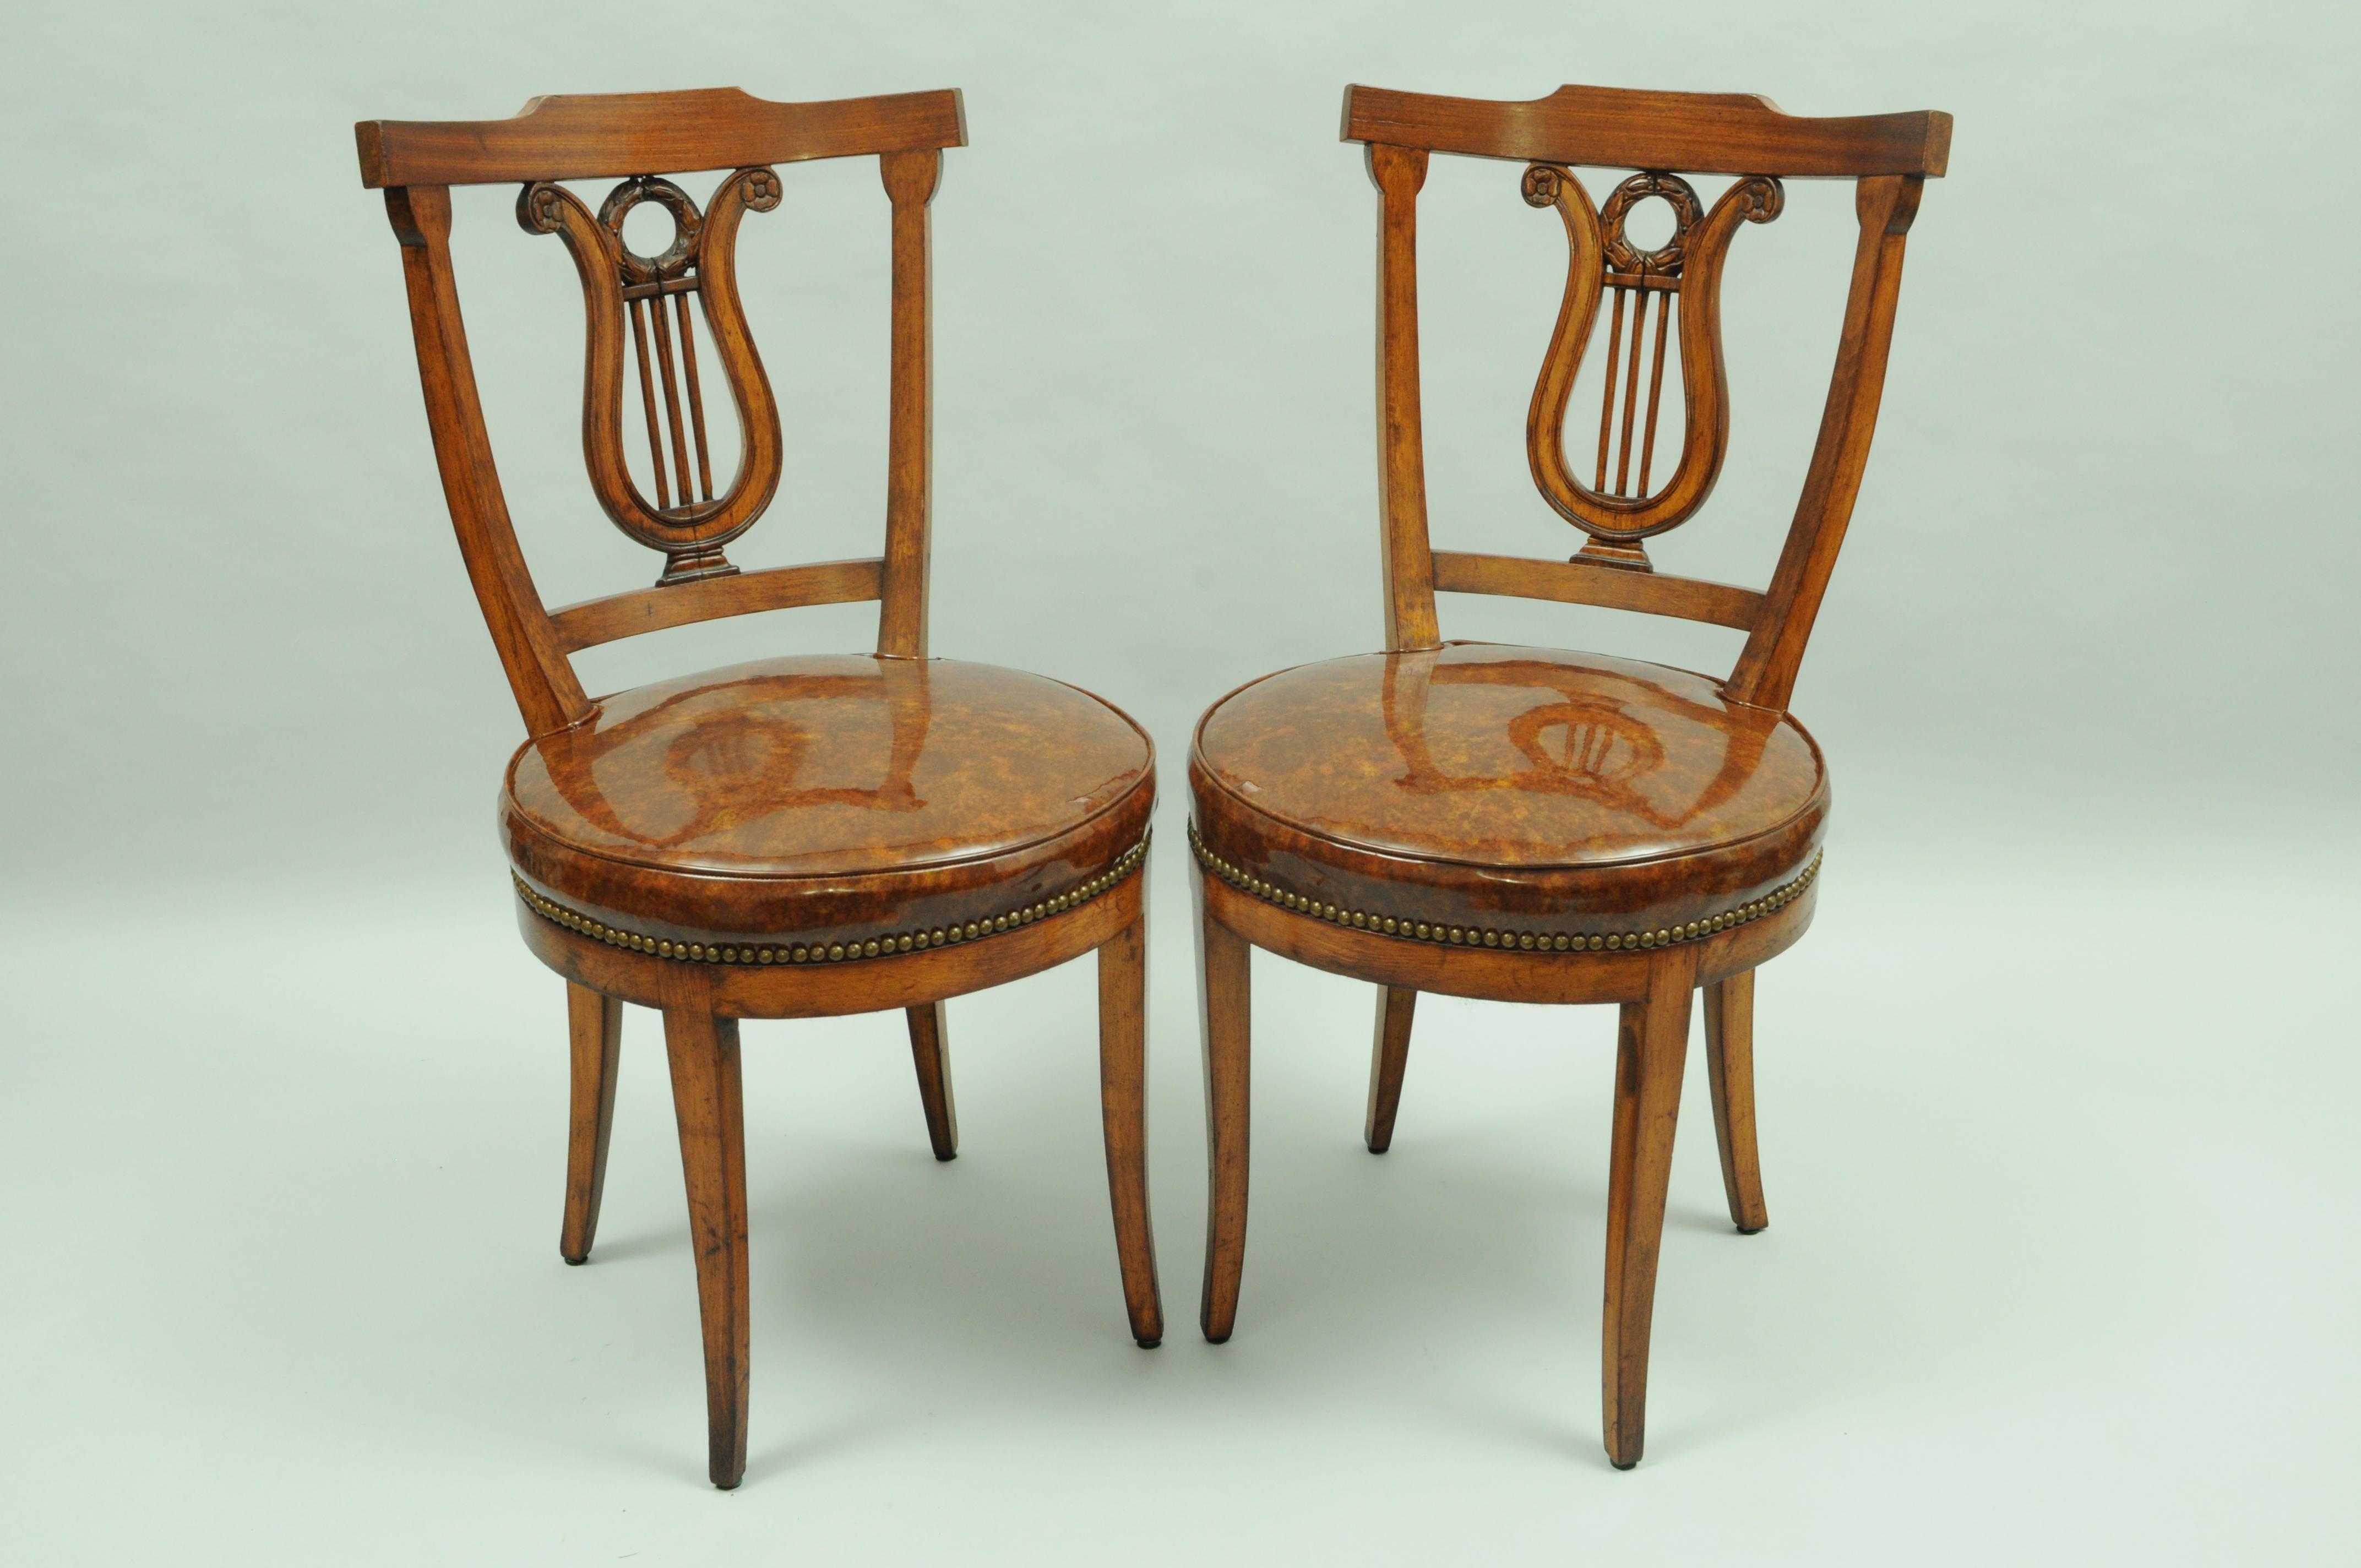 Set of four vintage lyre back regency or neoclassical style side chairs. Chairs feature; faux tortoise shell brown vinyl upholstered round seats, shapely klismos legs, original manufacturers distressed or antiqued finish to the solid wood frames,